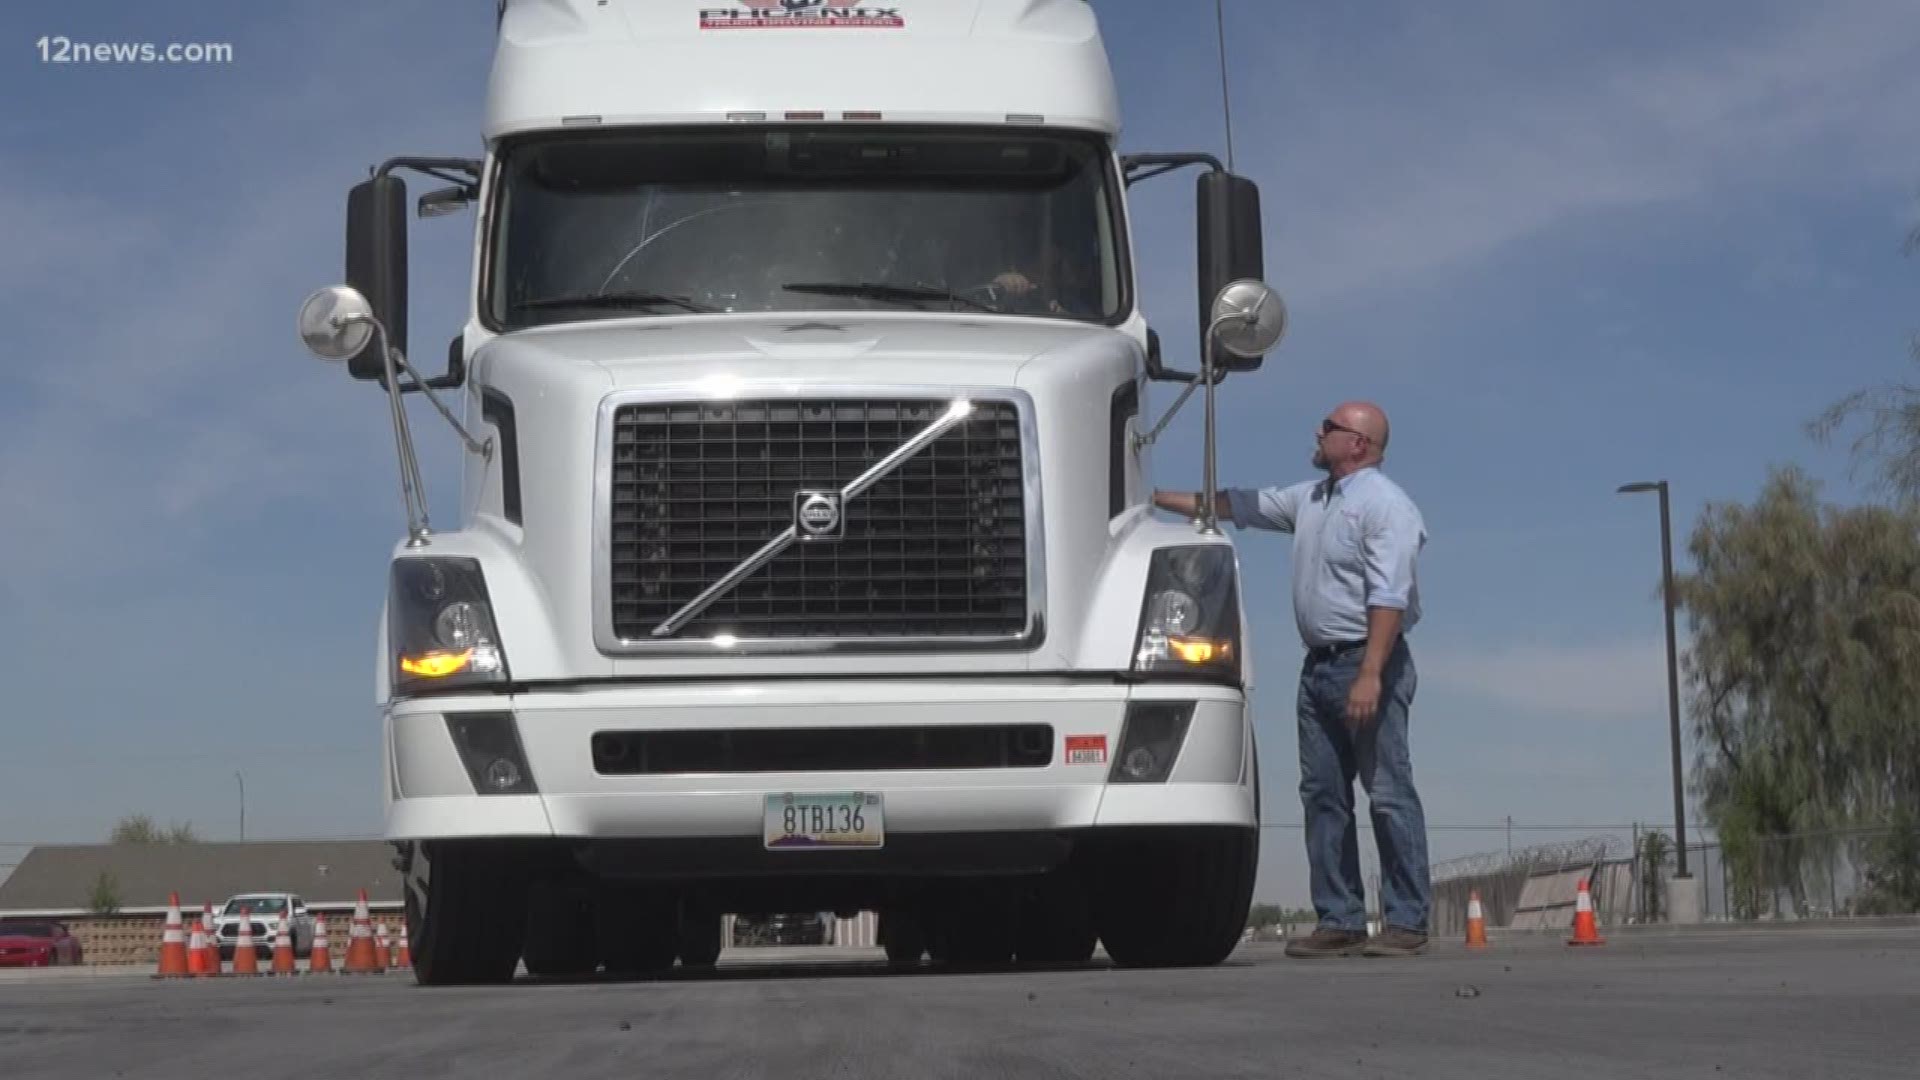 Without enough drivers shipping costs will go up and be passed on to consumers. The trucking industry is tacking on signing bonuses to lure people into the industry.